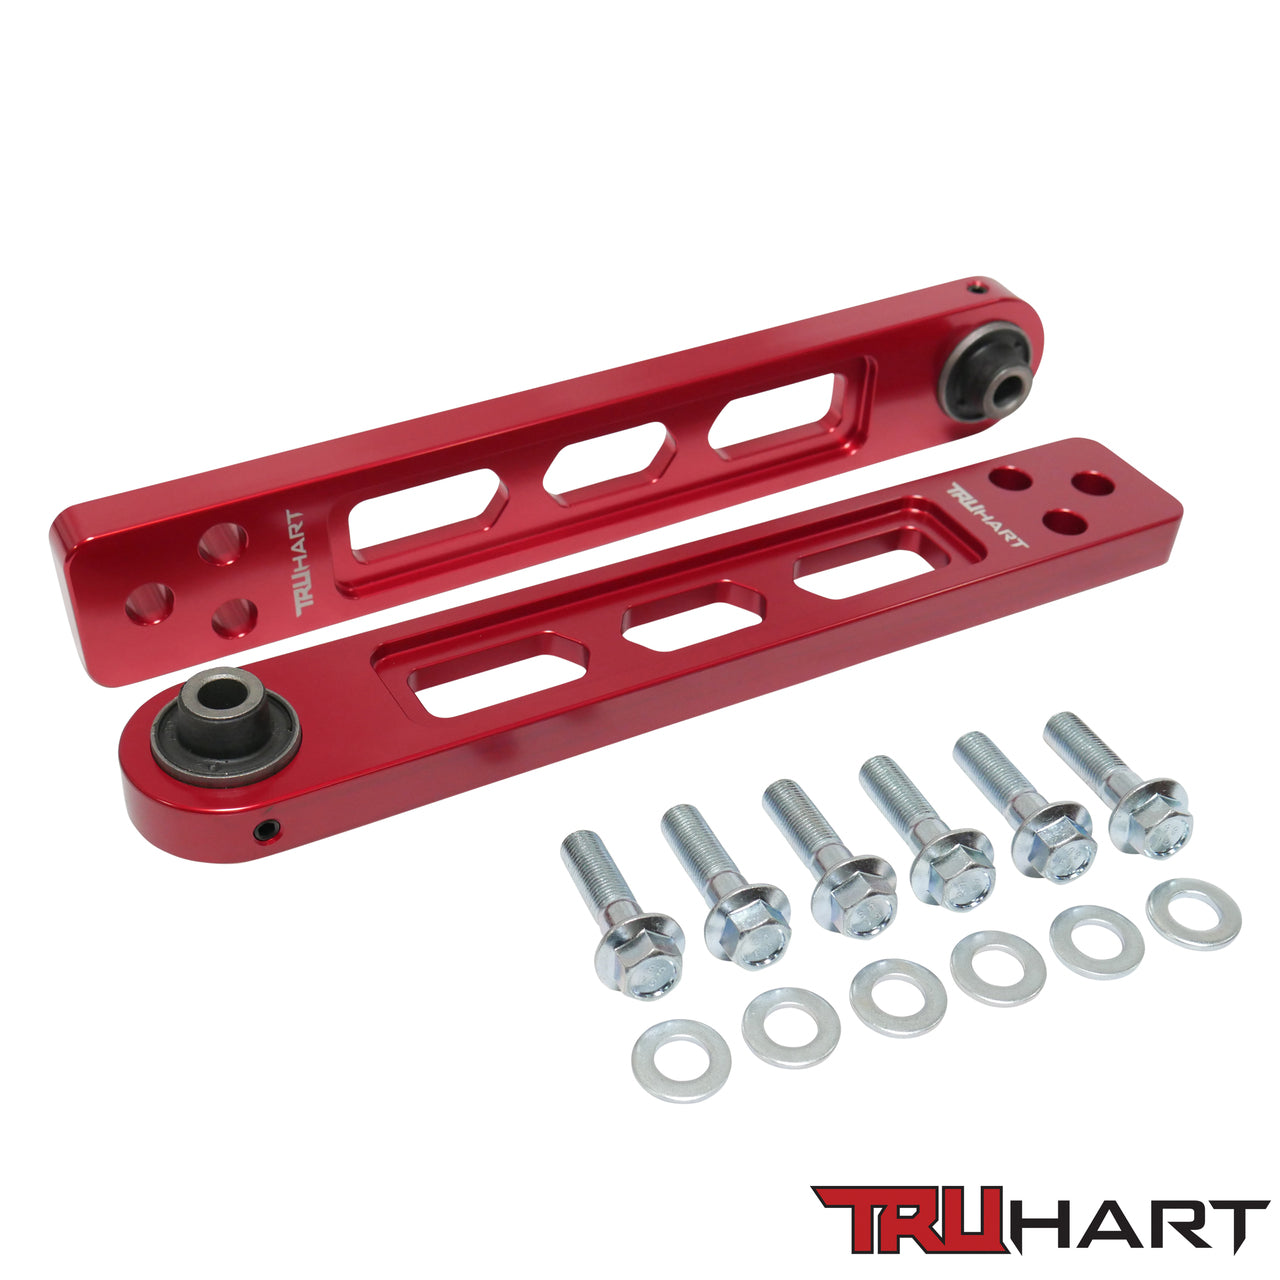 TruHart Rear Lower Control Arms - Red 01-05 Honda Civic - TH-H103-1-RE